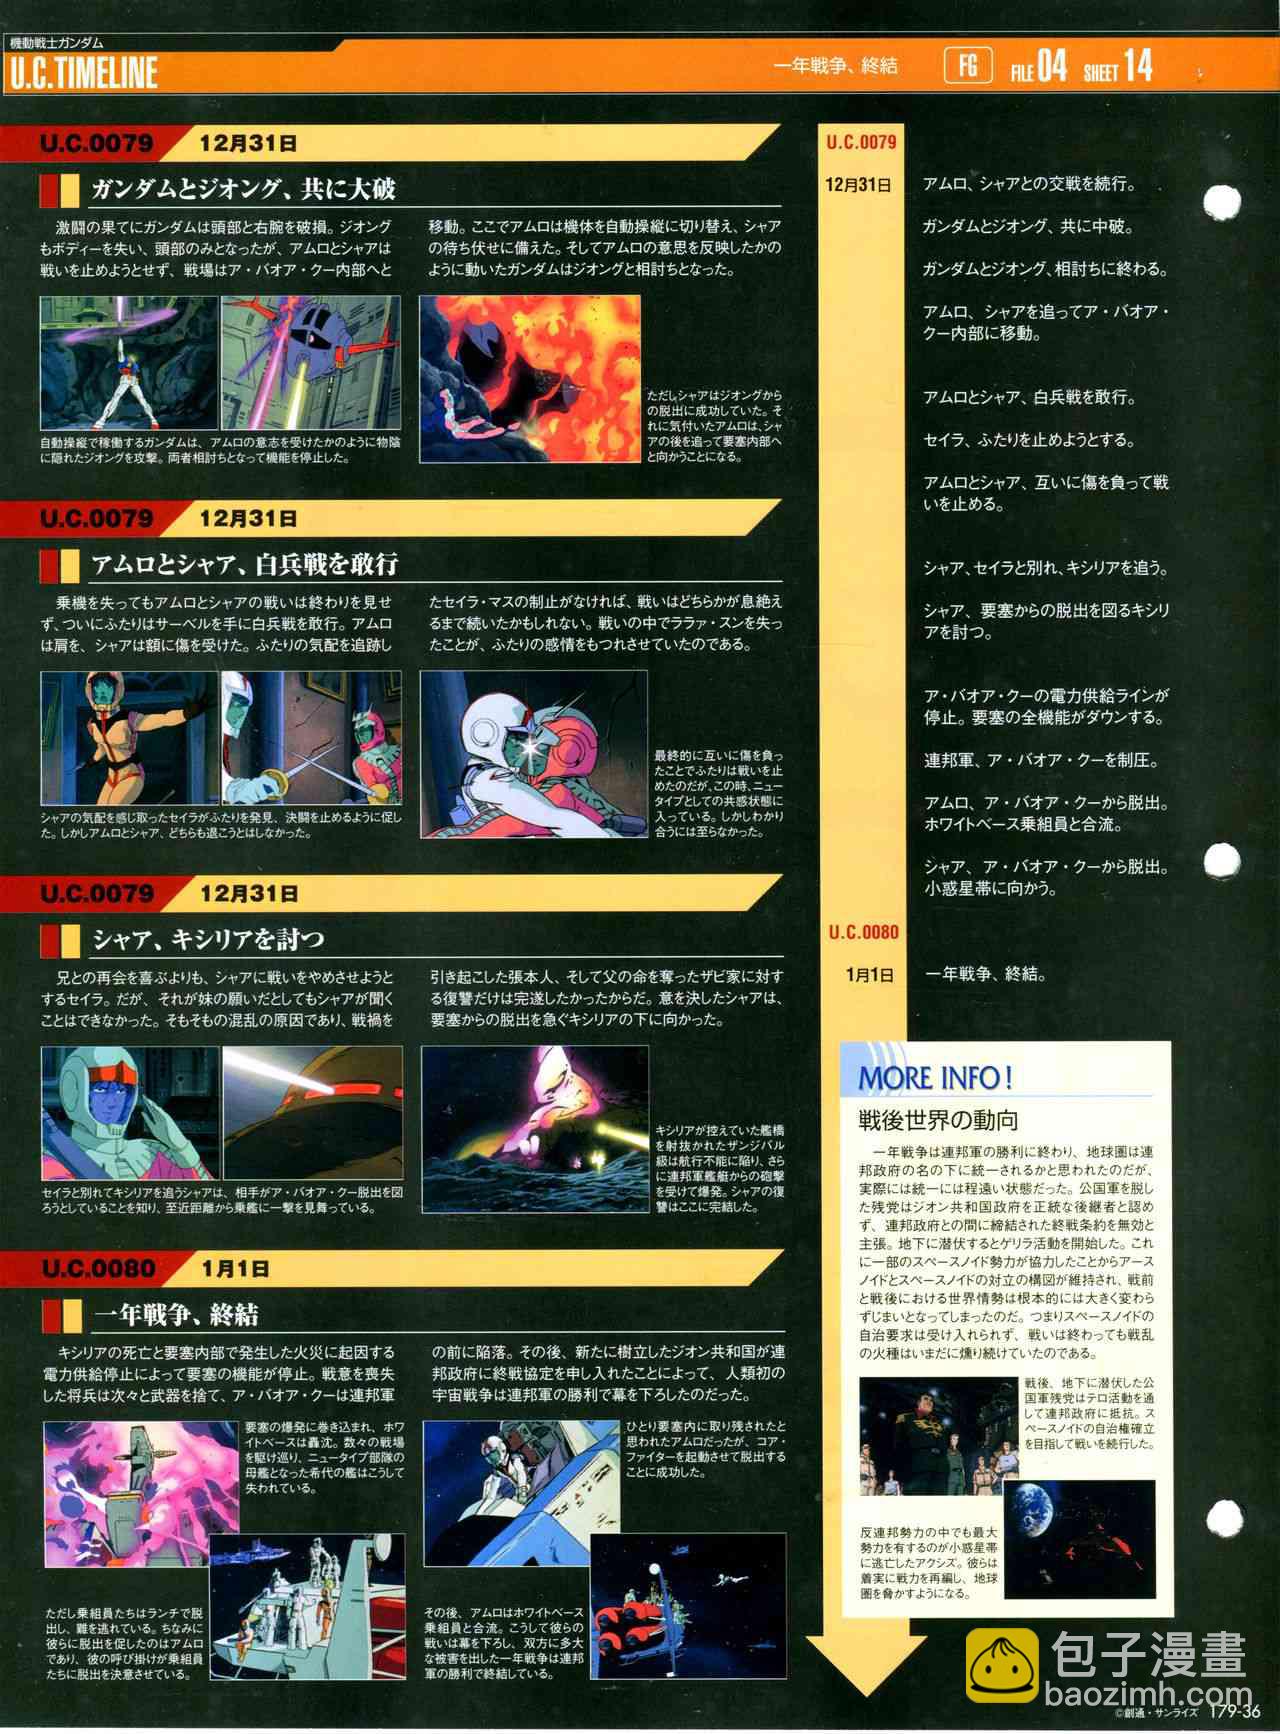 The Official Gundam Perfect File  - 179話 - 3